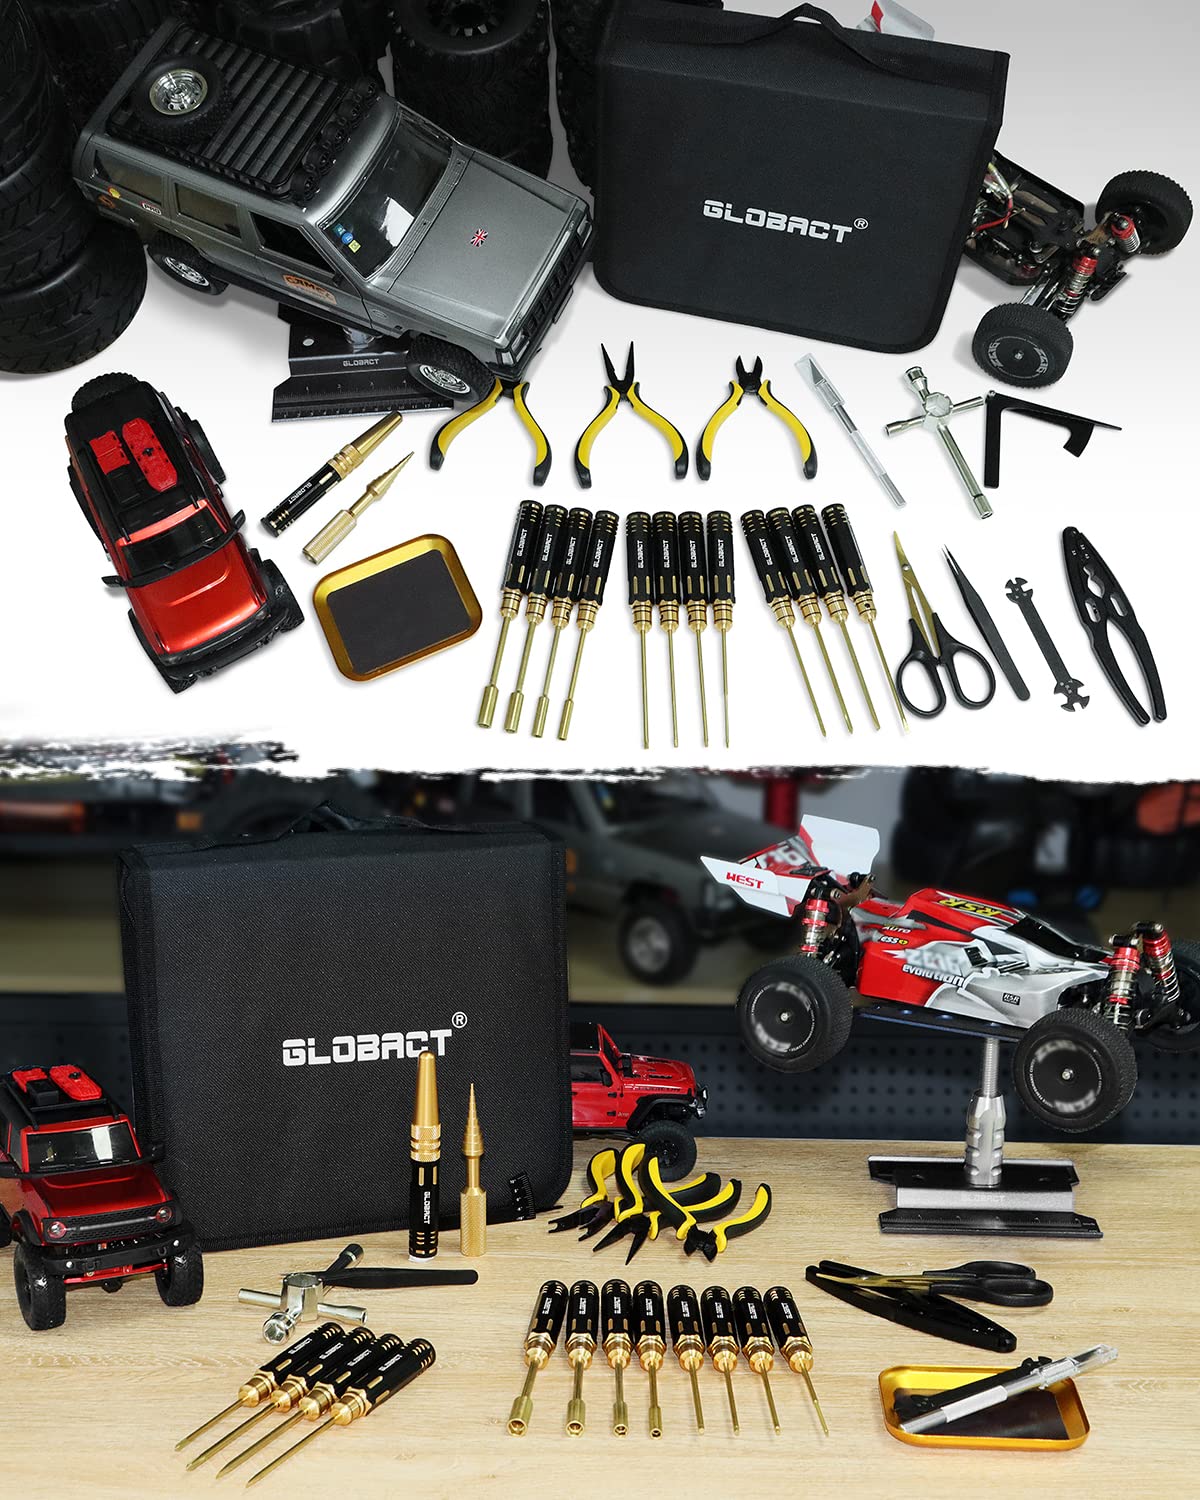 GLOBACT RC Tool Kit RC Screwdriver Kit, RC Car Stand, RC Hex Driver Set, RC  Pliers Set, Screws Tray, Wrench, Body Reamer for 1/8 1/10 Slash Axial